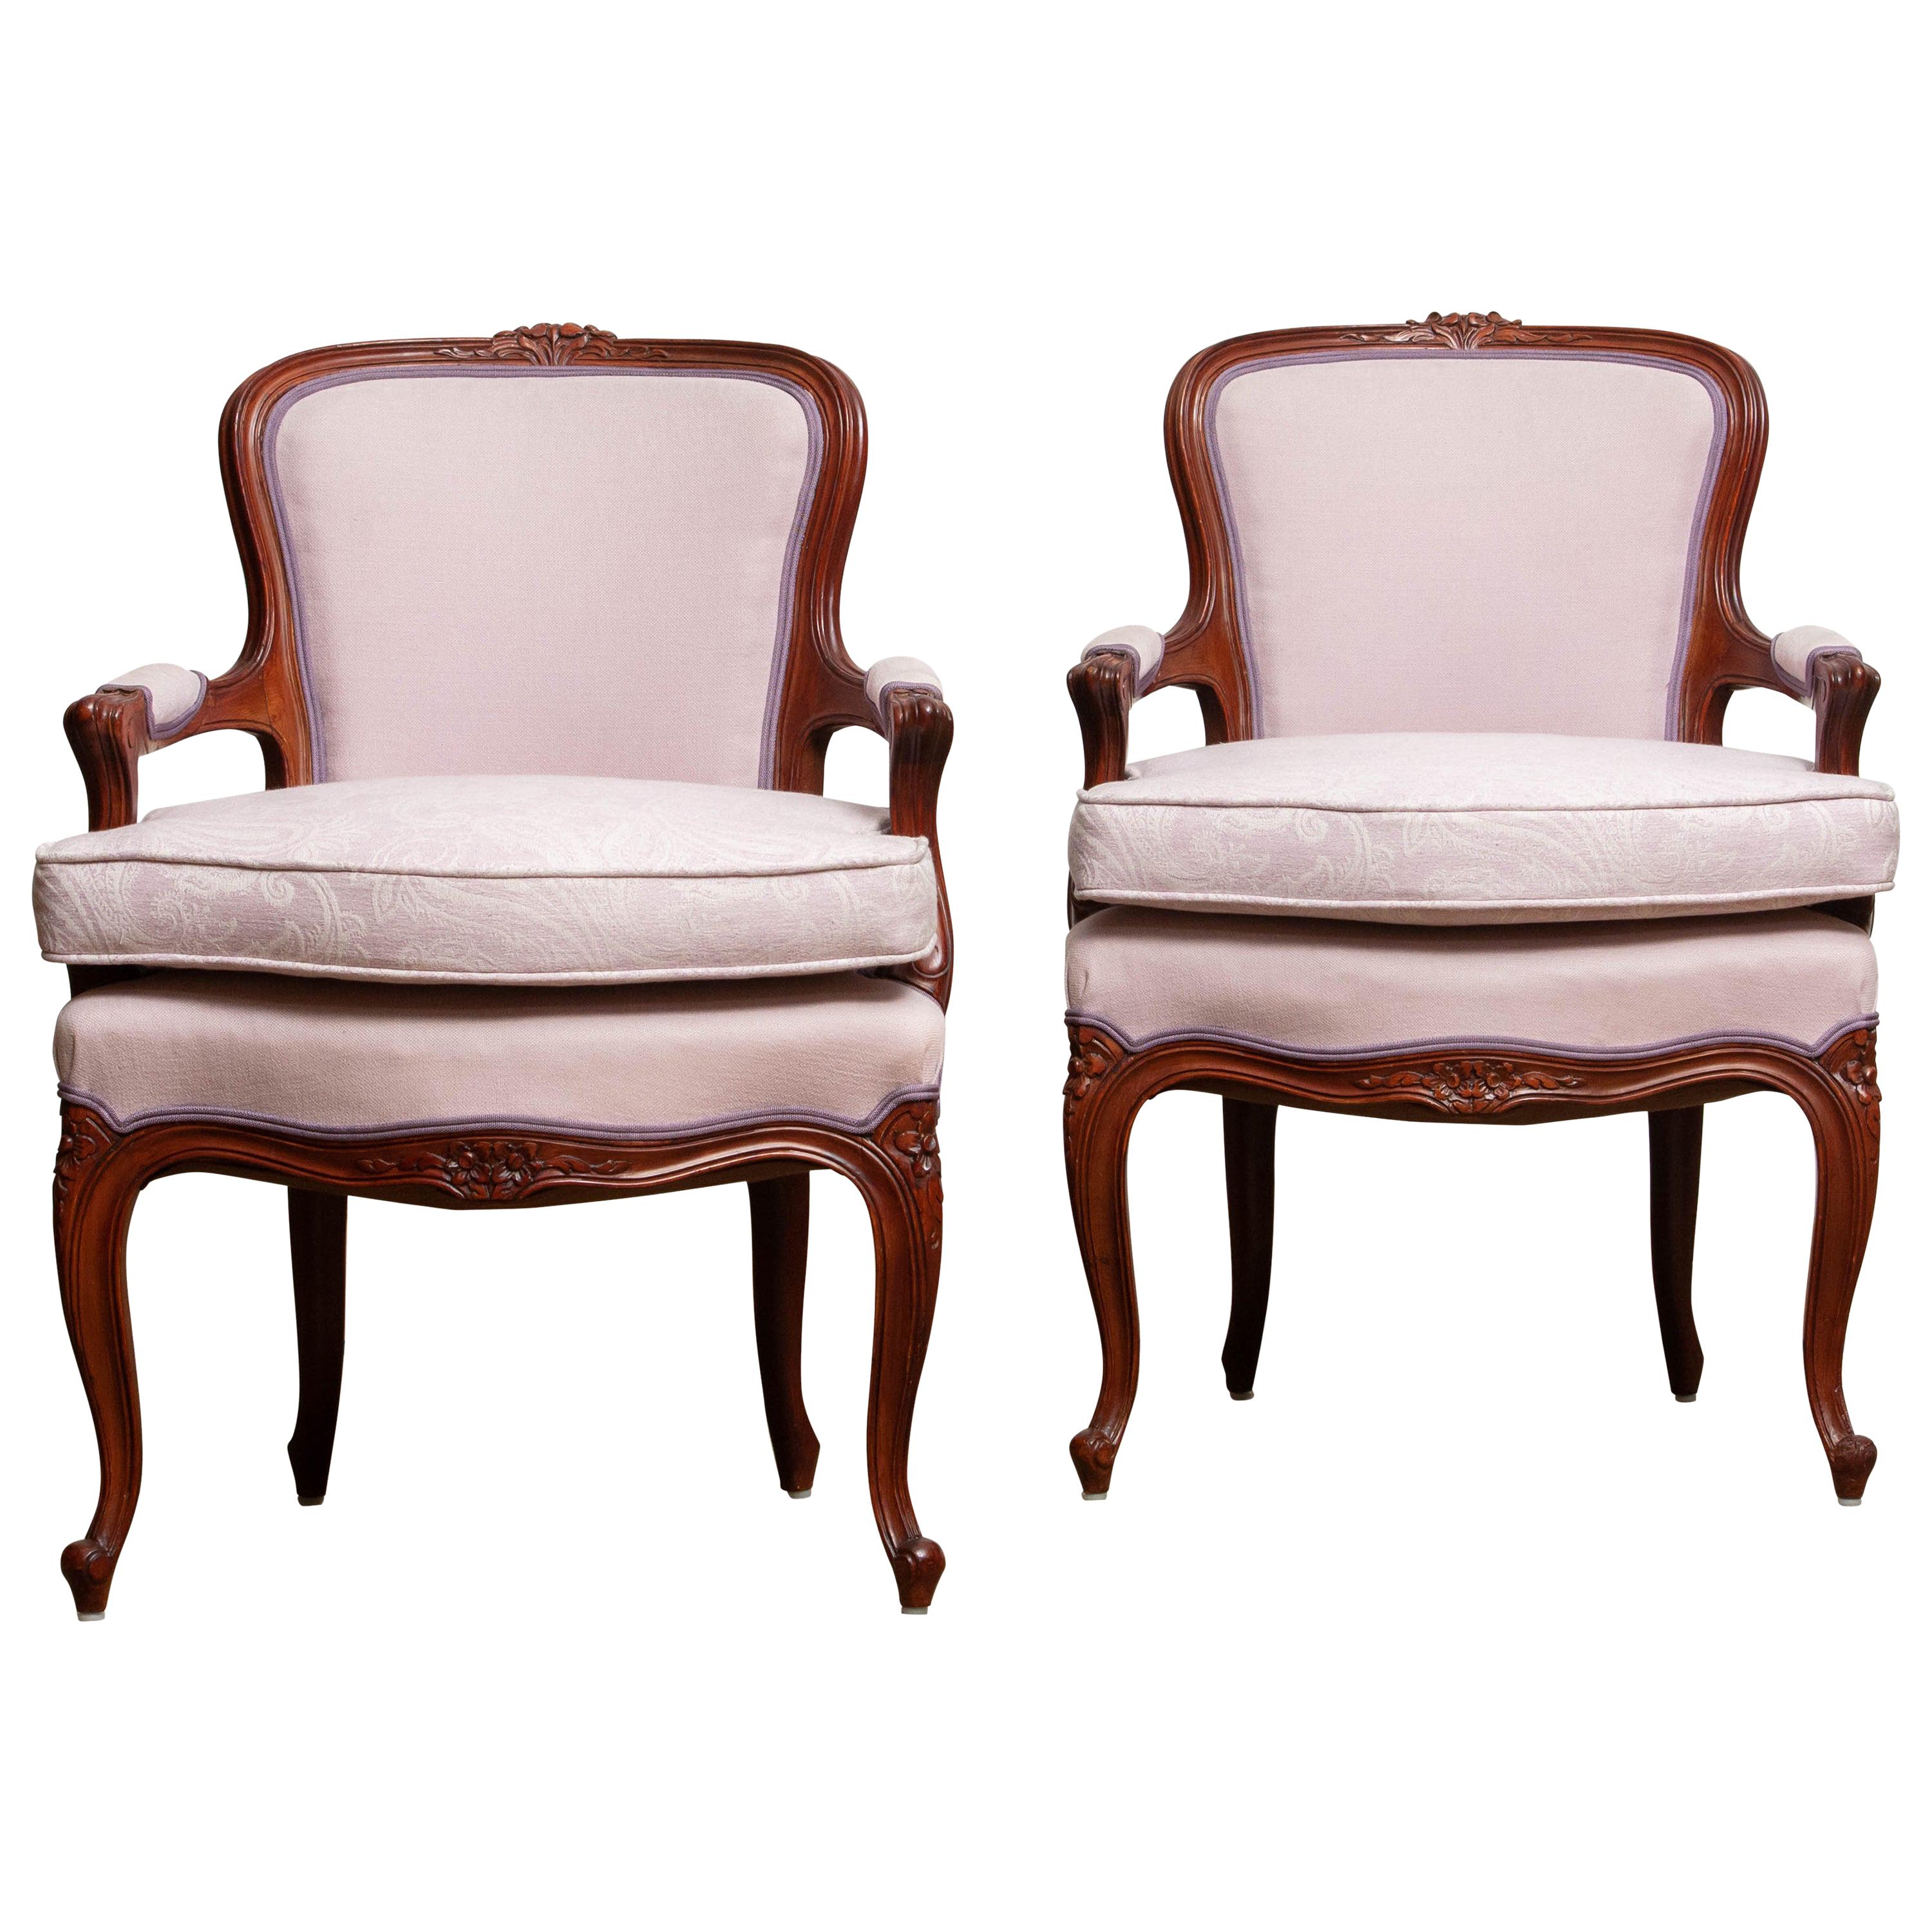 1950 Pair of Pink Swedish Rococo Bergères in the Shabby Chic Technique Chairs F